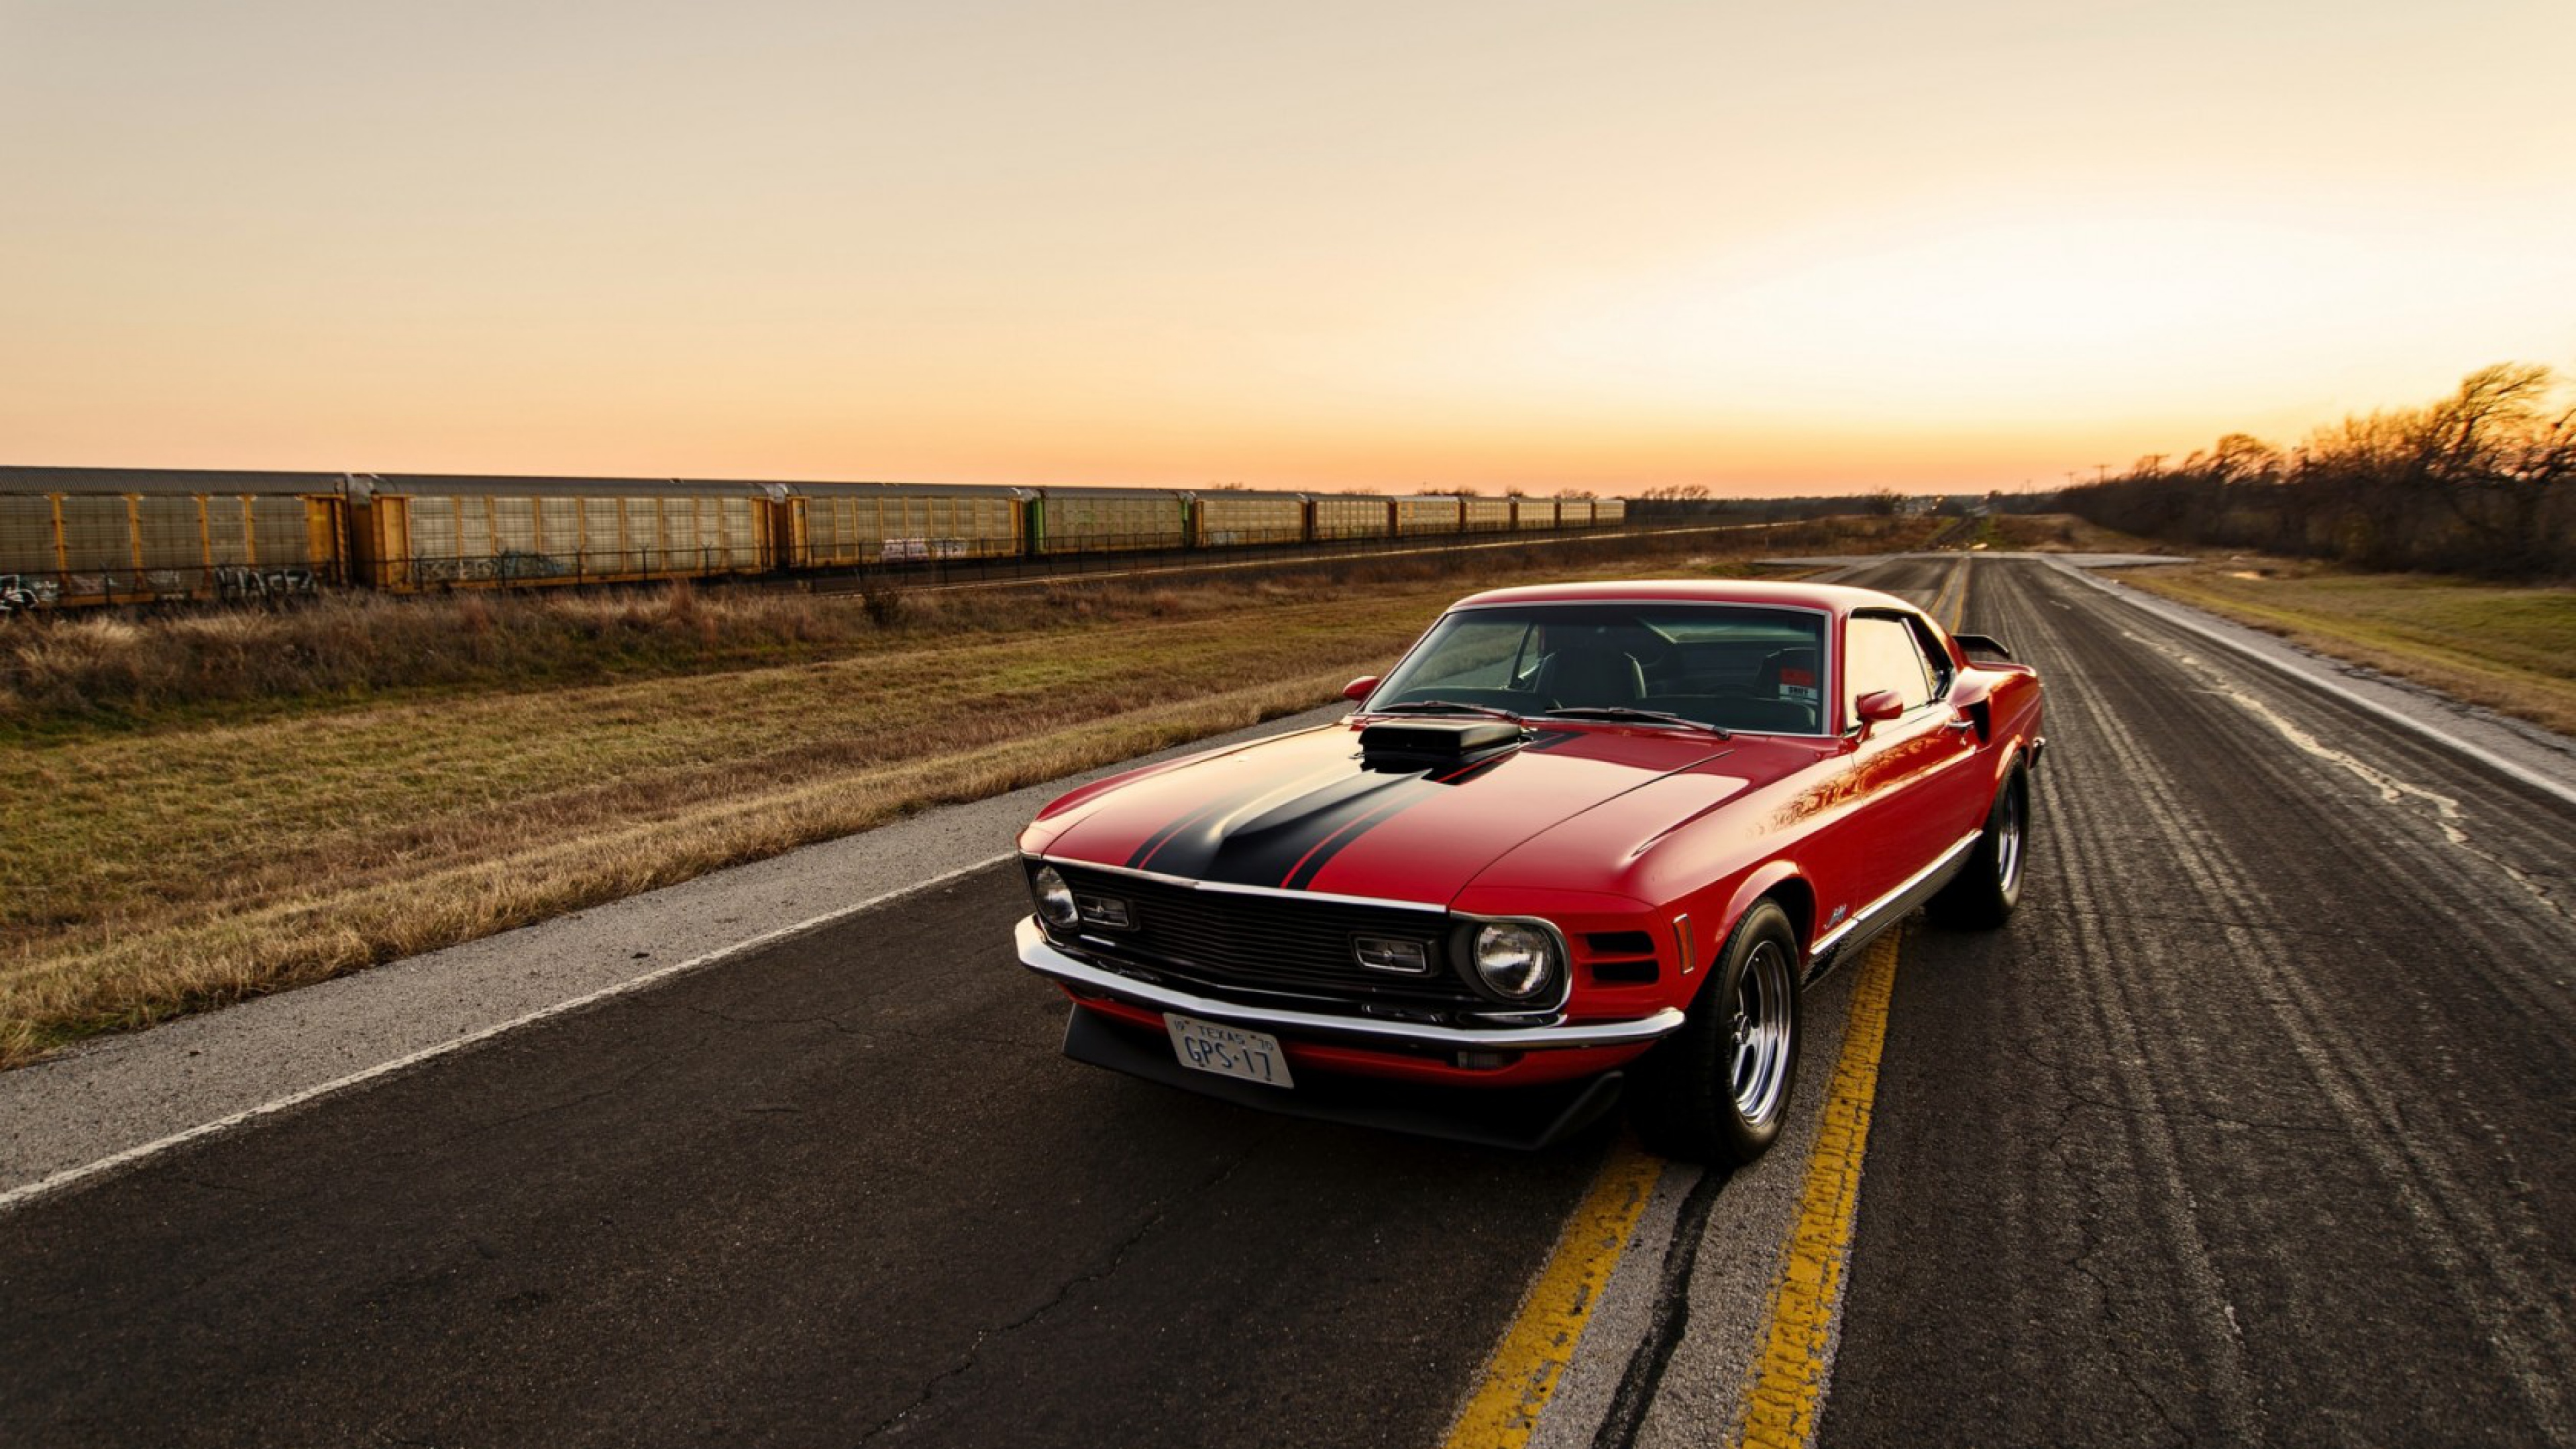 1970 Mustang Wallpapers Group 60